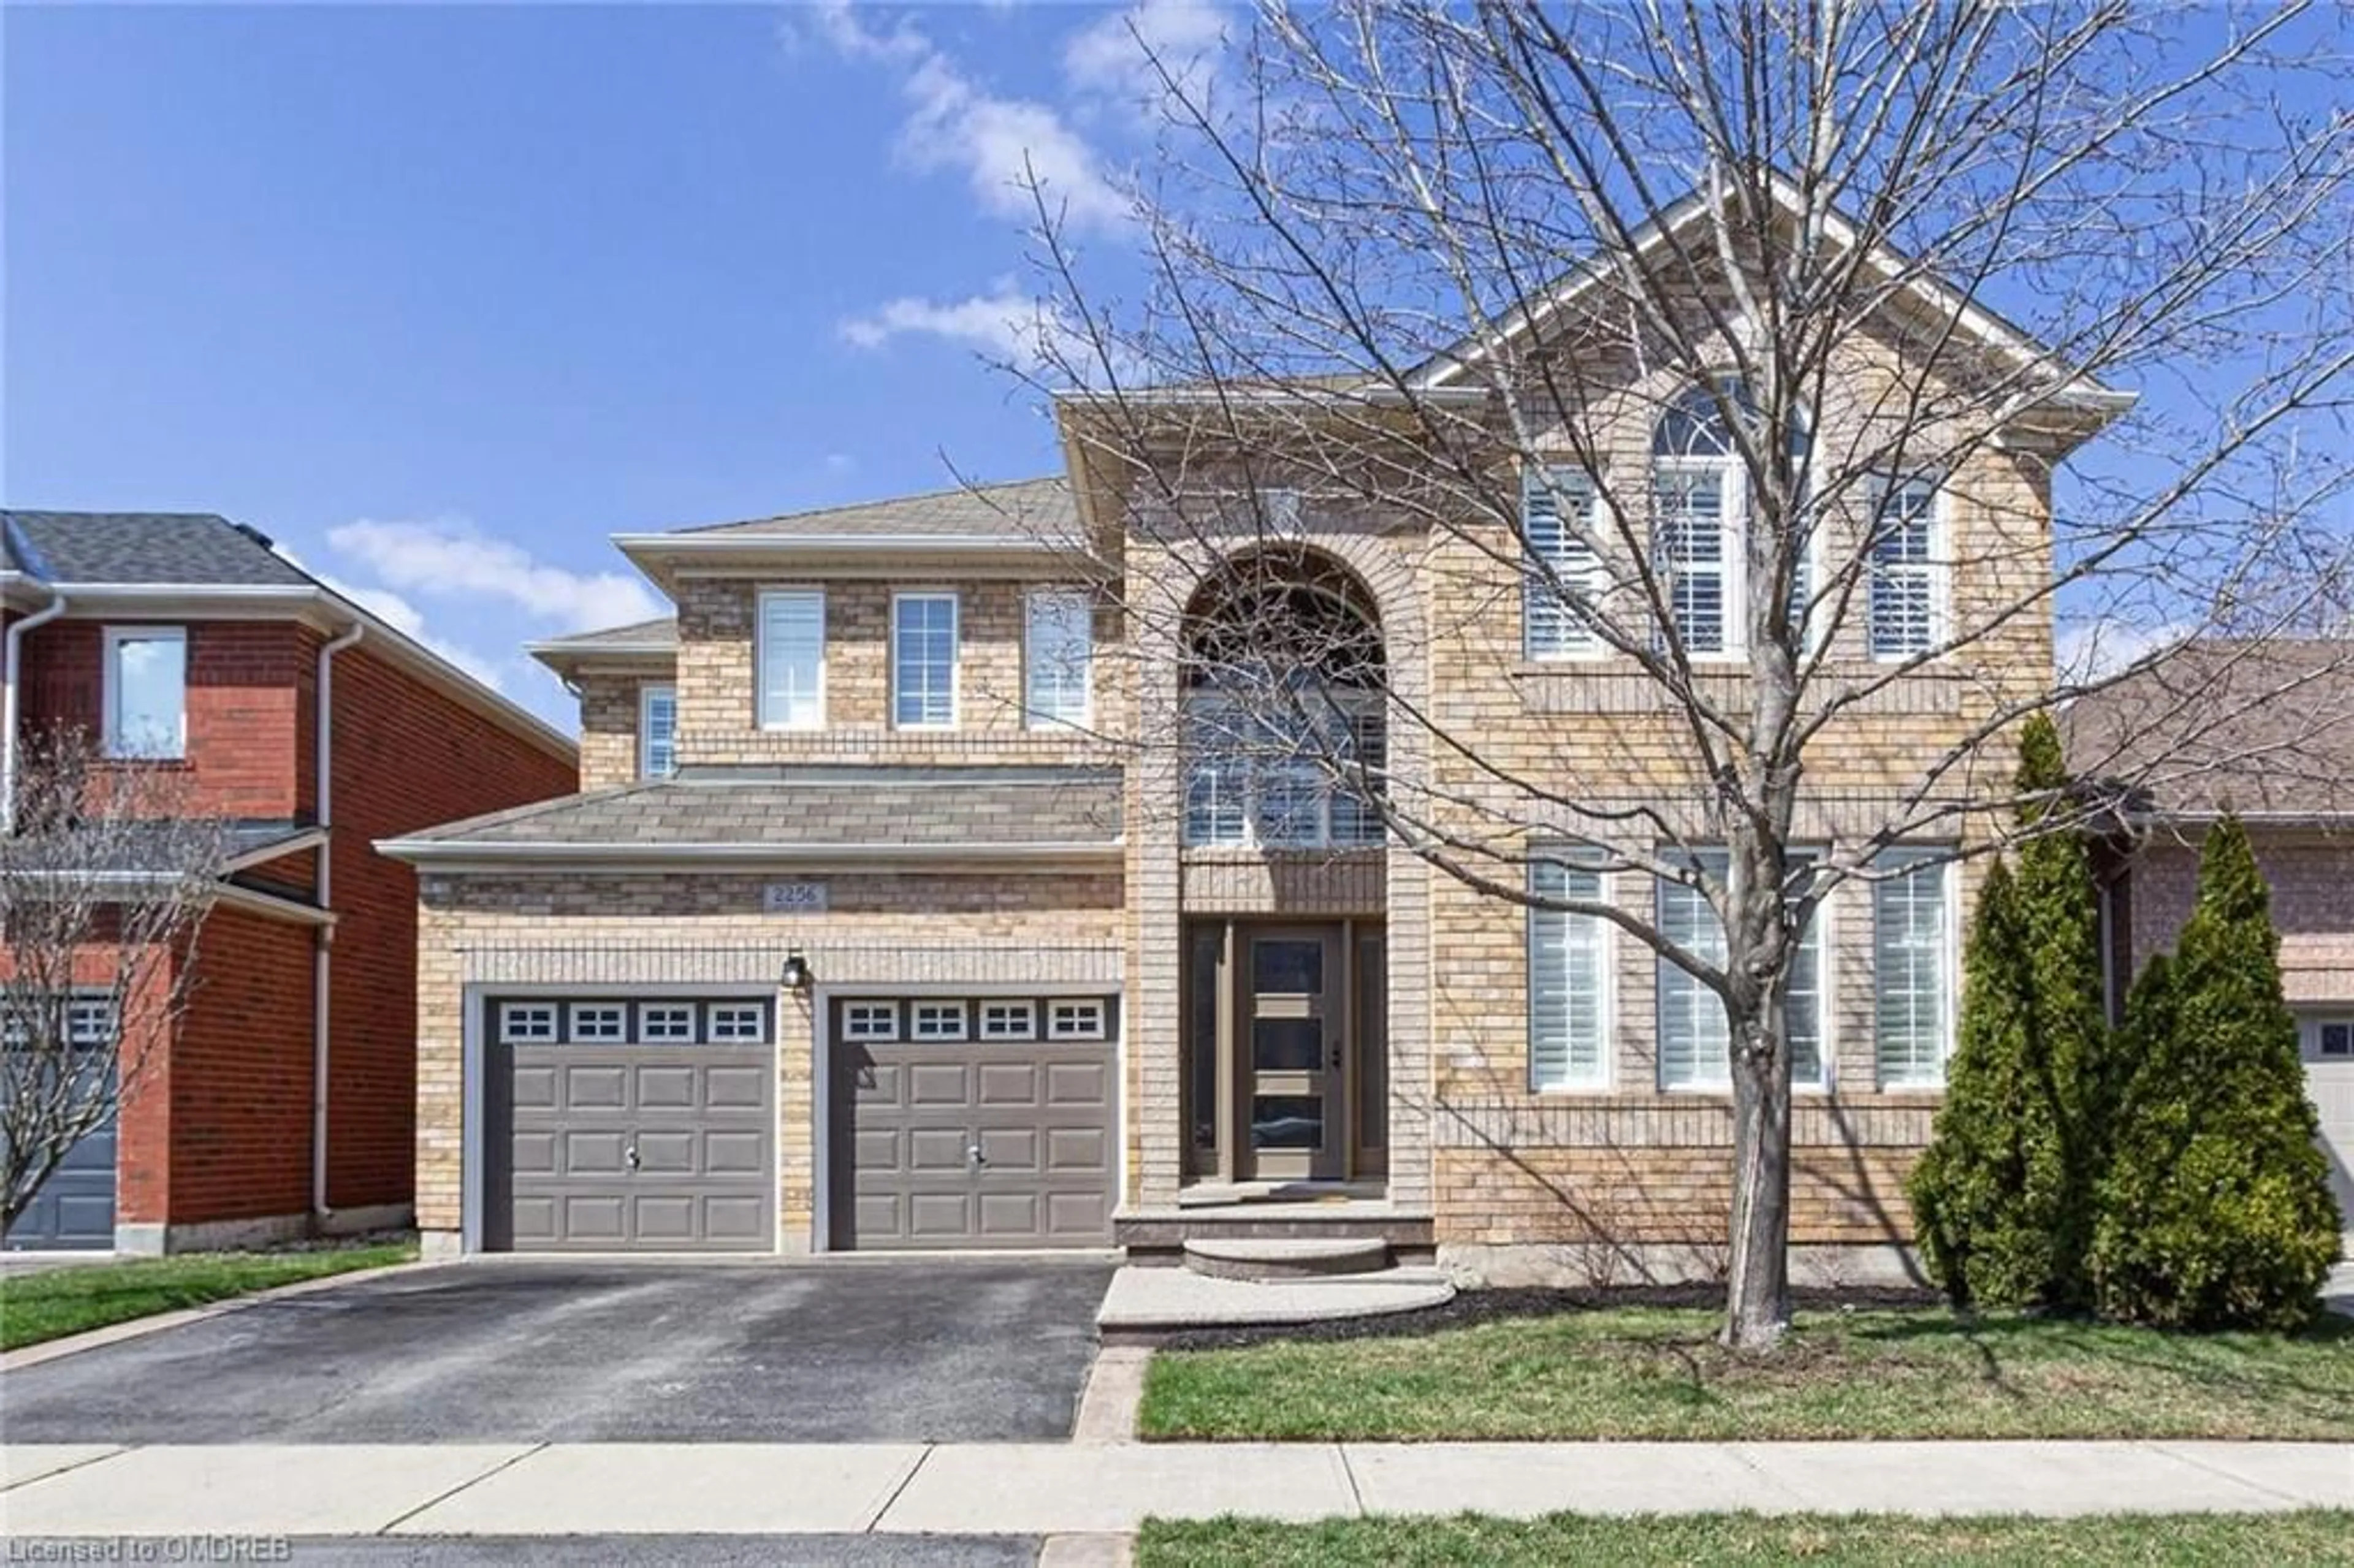 Home with brick exterior material for 2256 Lapsley Cres, Oakville Ontario L6M 4V1